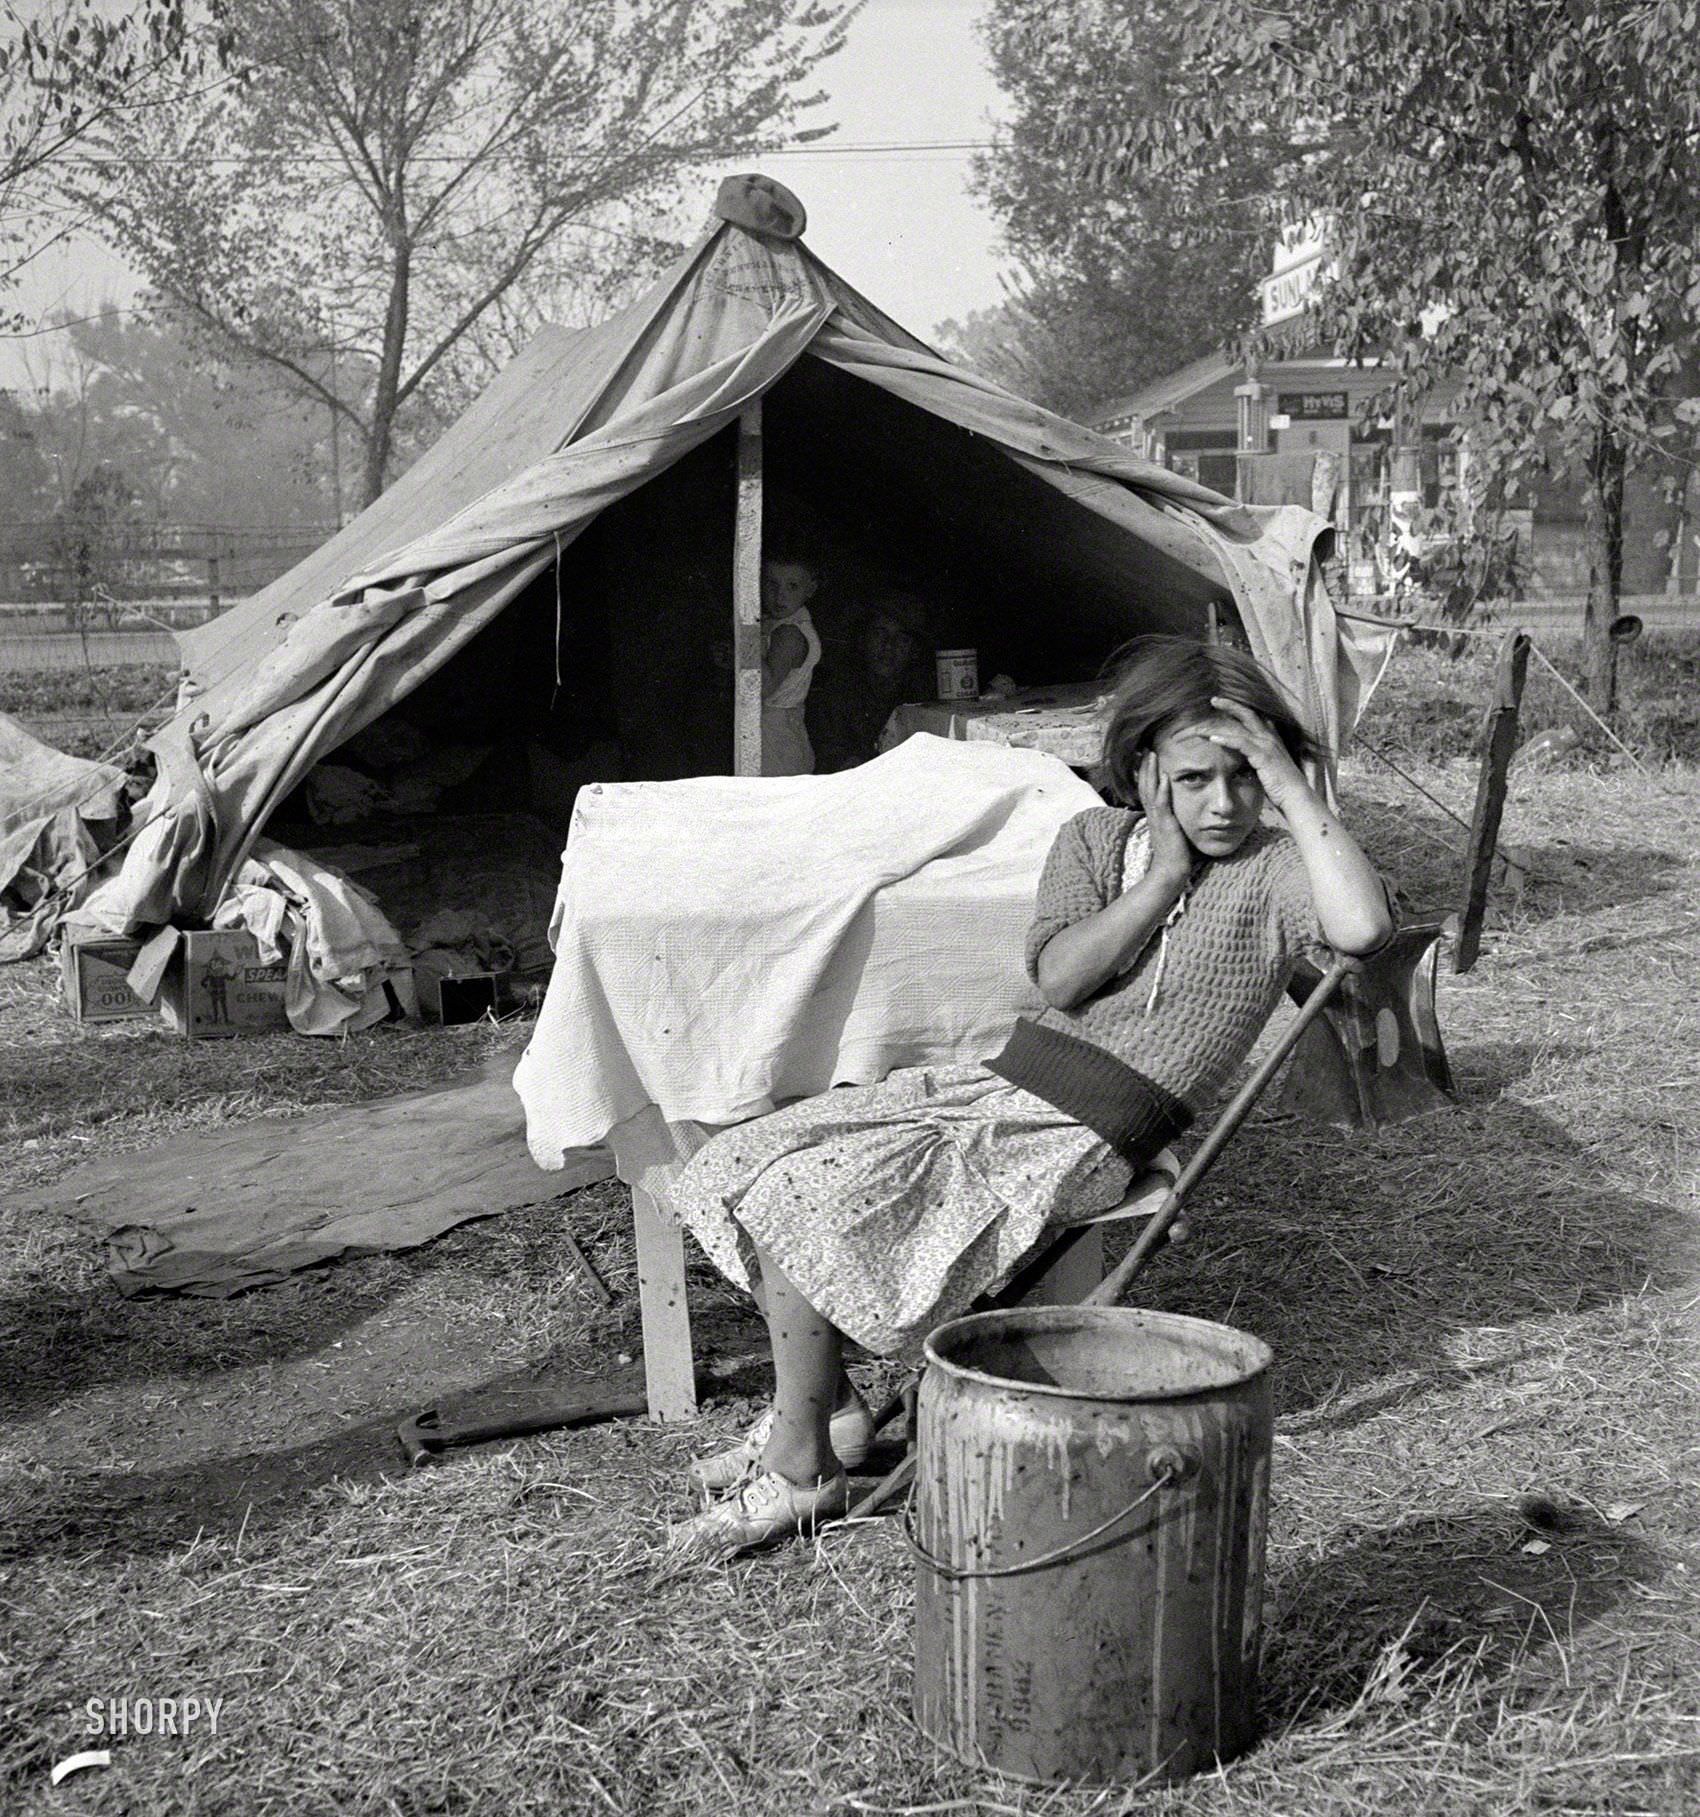 Children and home of cotton workers at migratory camp in southern San Joaquin Valley, California, 1936